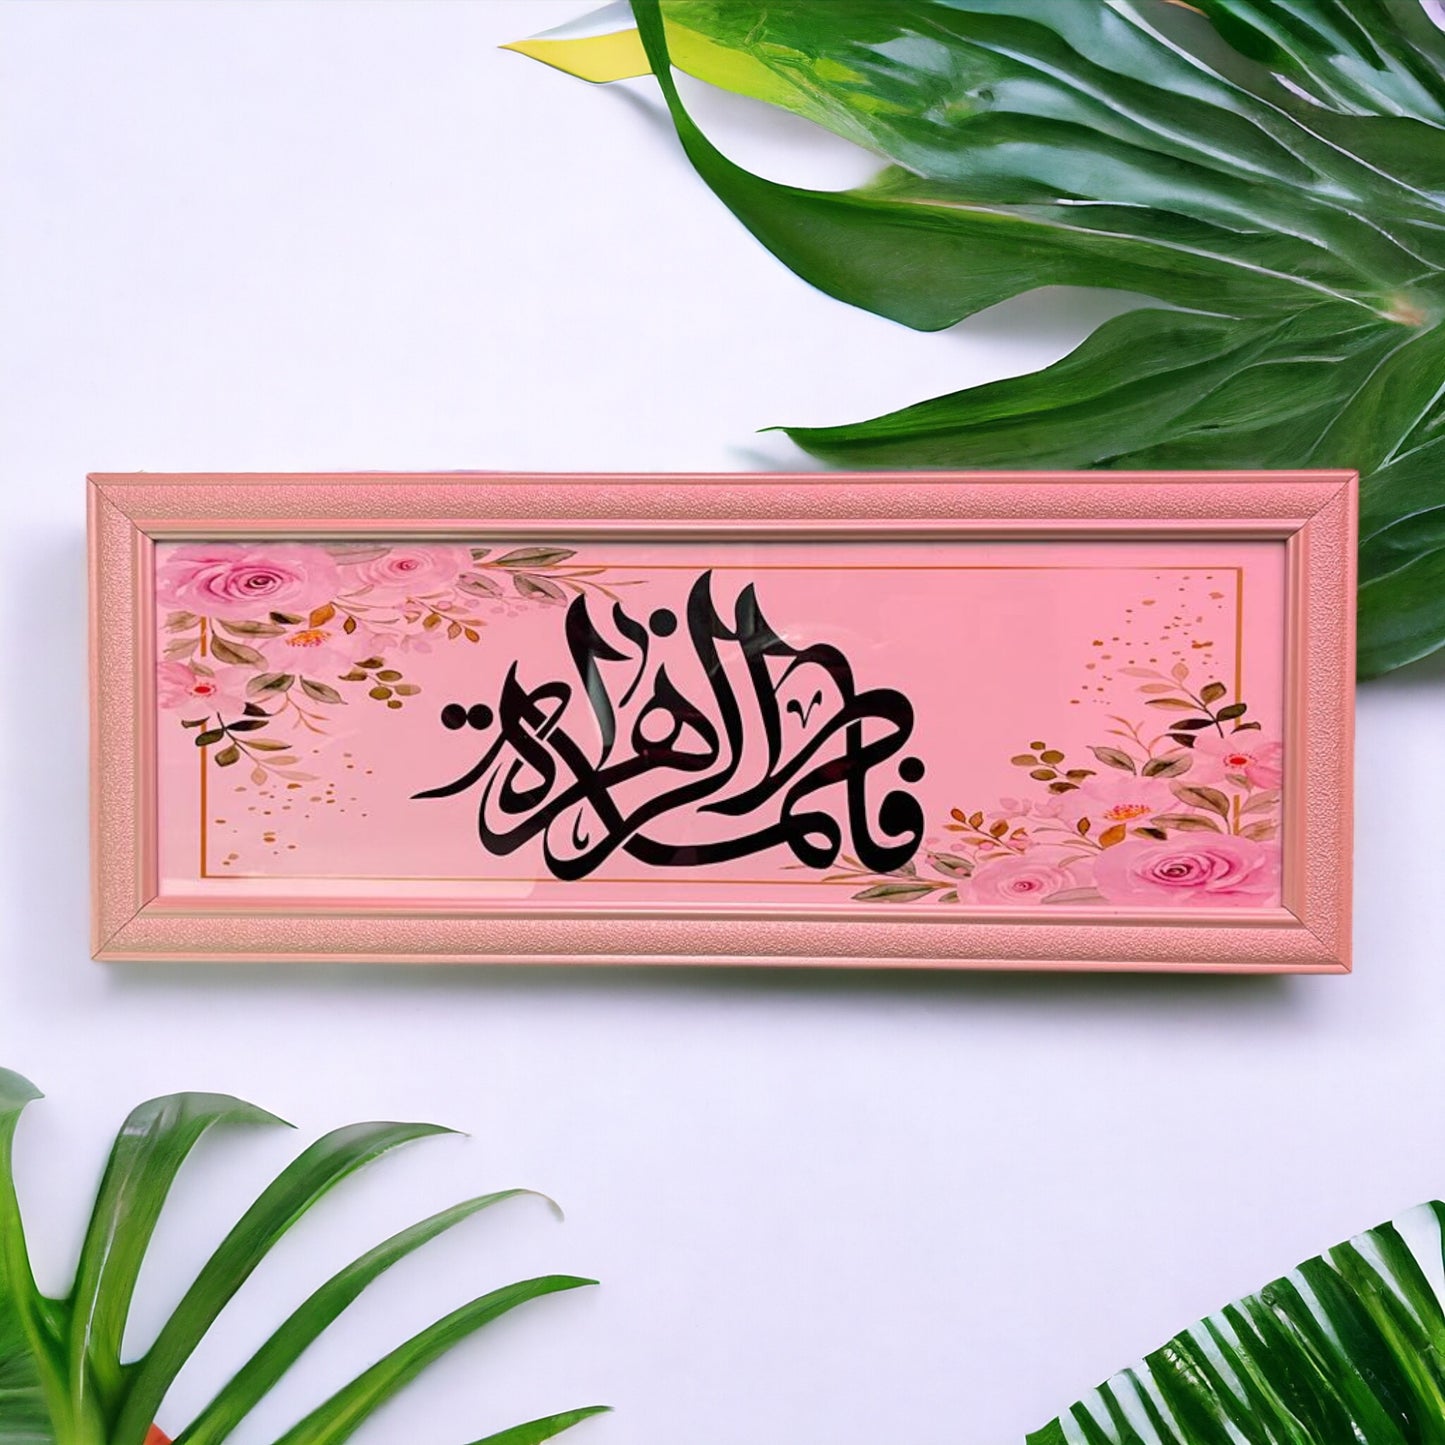 Buy or send Janab e Fatima Bibi Frame online with Delivery from Bakers Wagon.